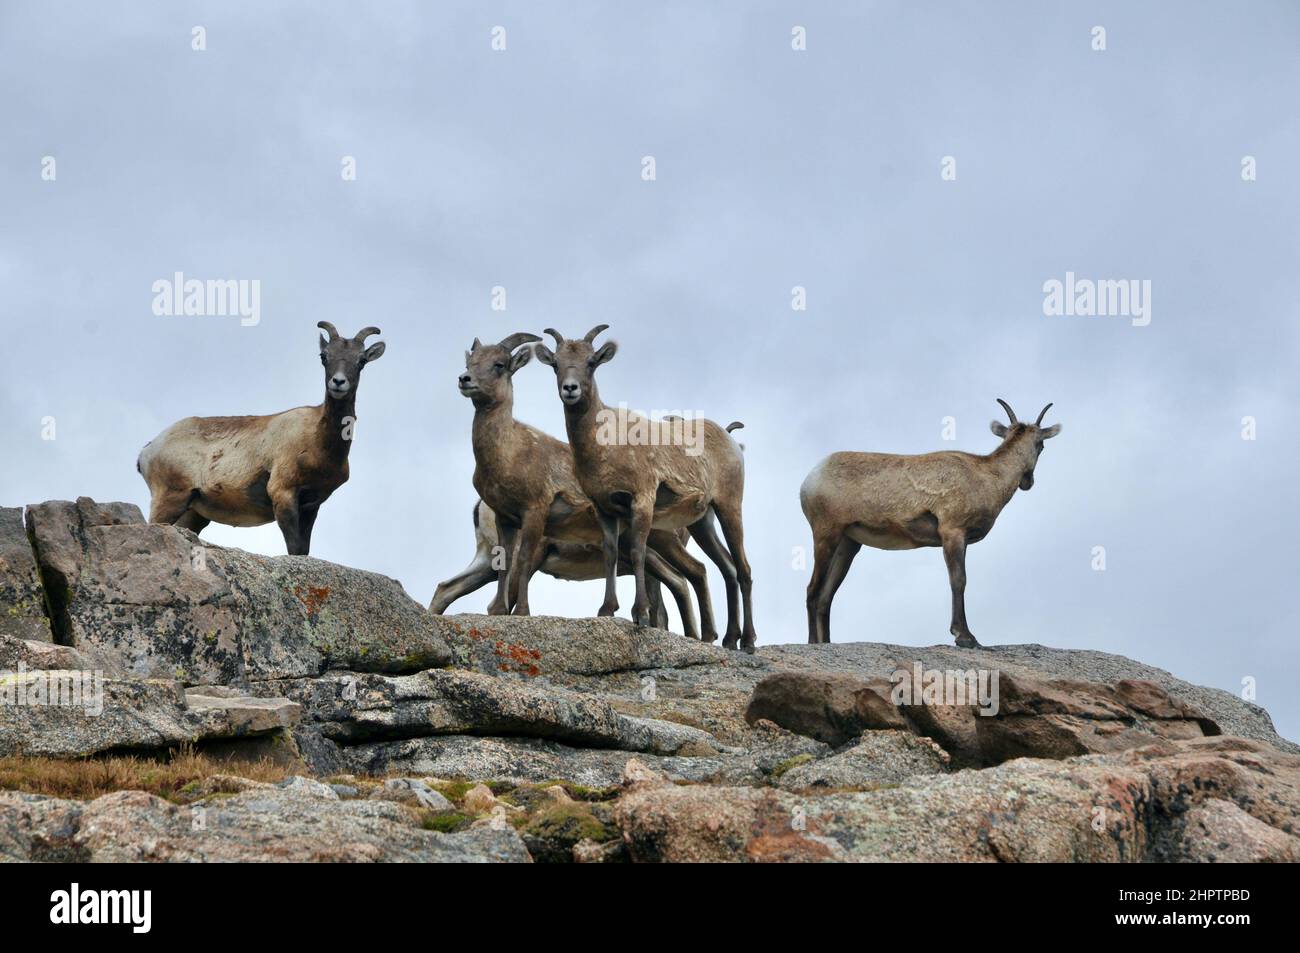 Wild Mountain Goats or Rocky Mountain goat, Along the Rocks and Mountain Sides of the Colorado Rocky Mountains in the United States Stock Photo